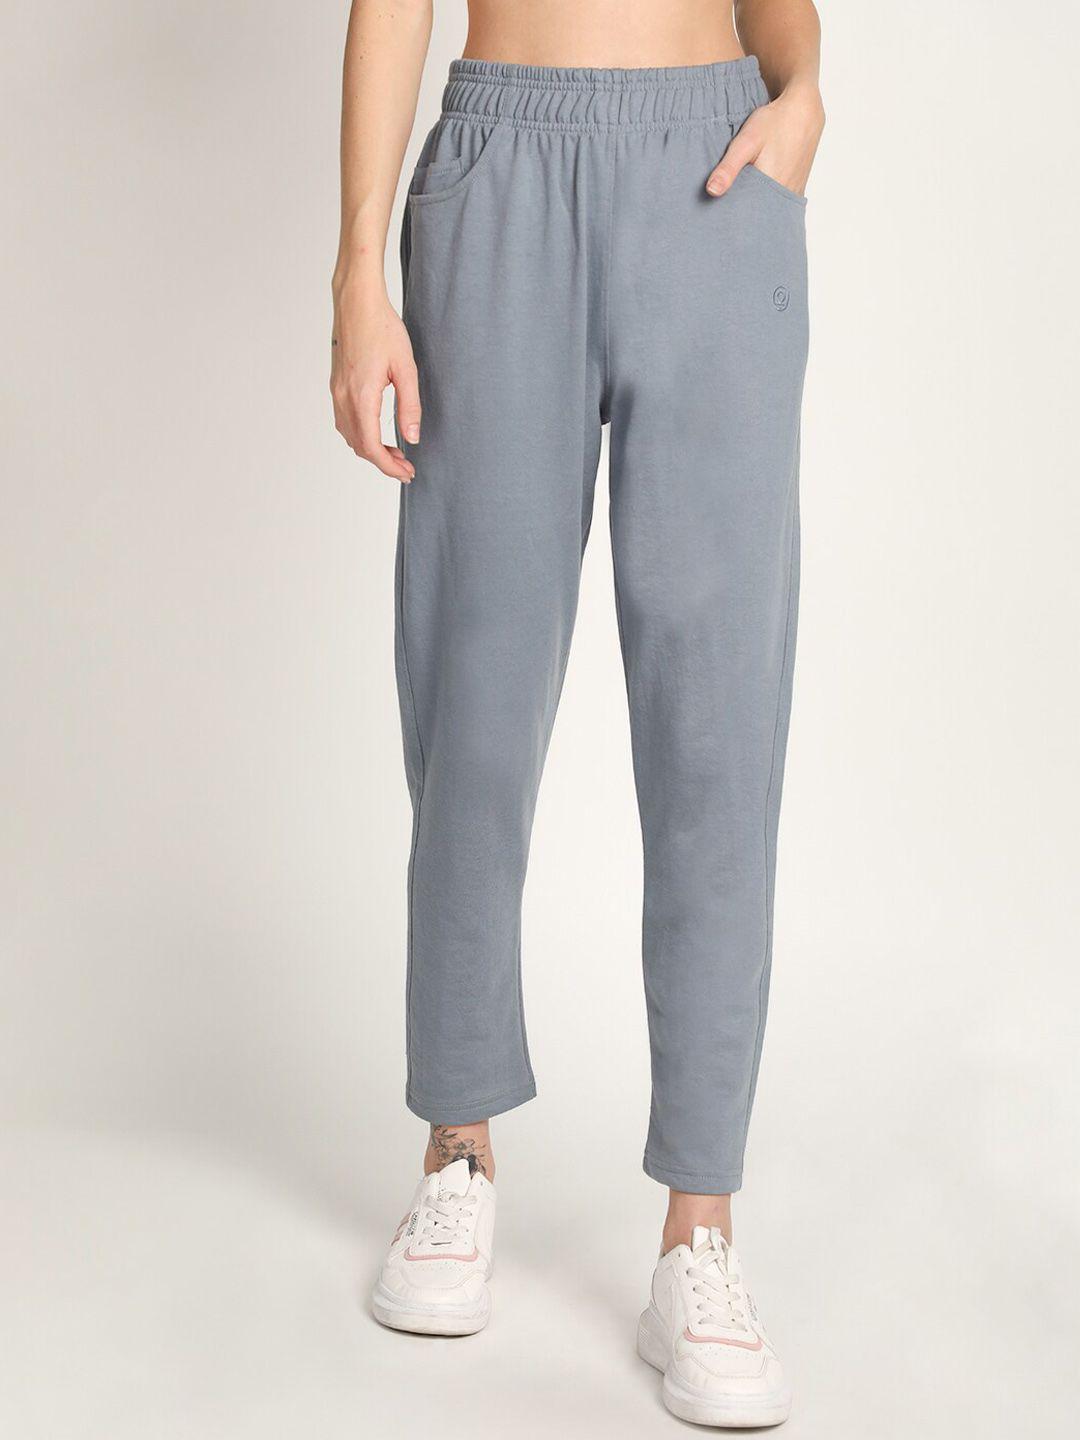 chkokko women grey solid relaxed fit track pants